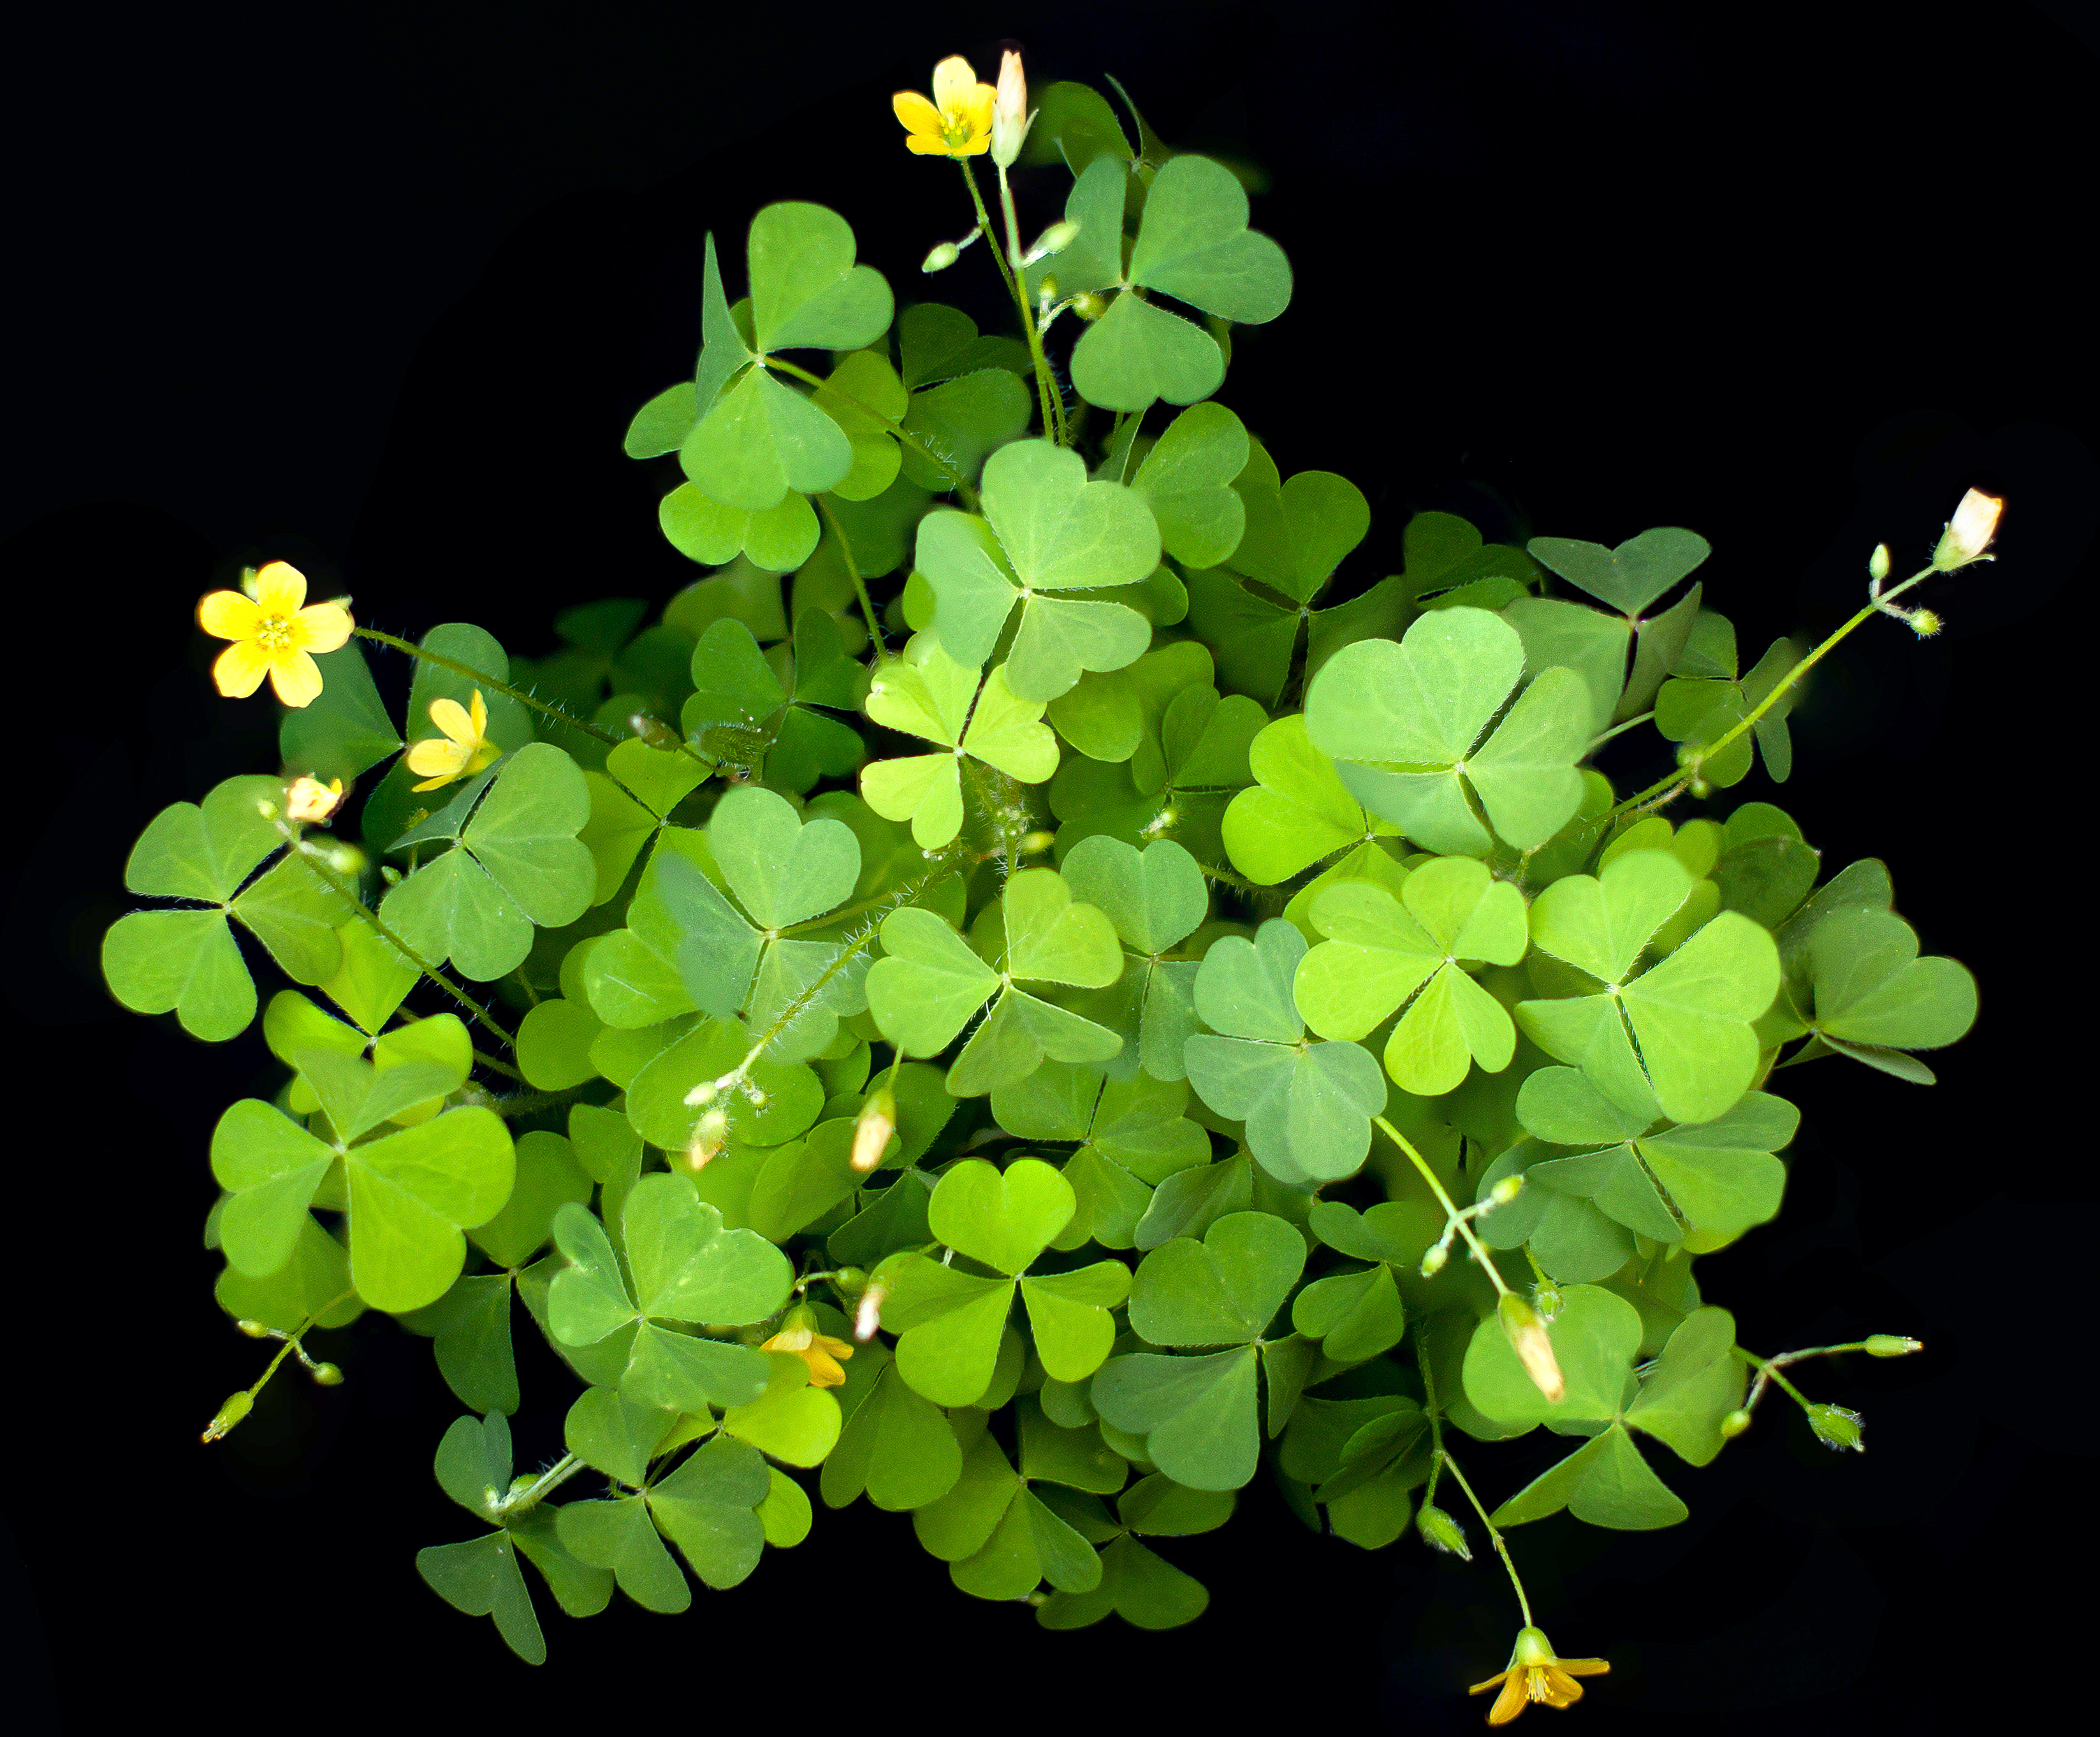 Common woodsorrel, leaves and yellow flowers.